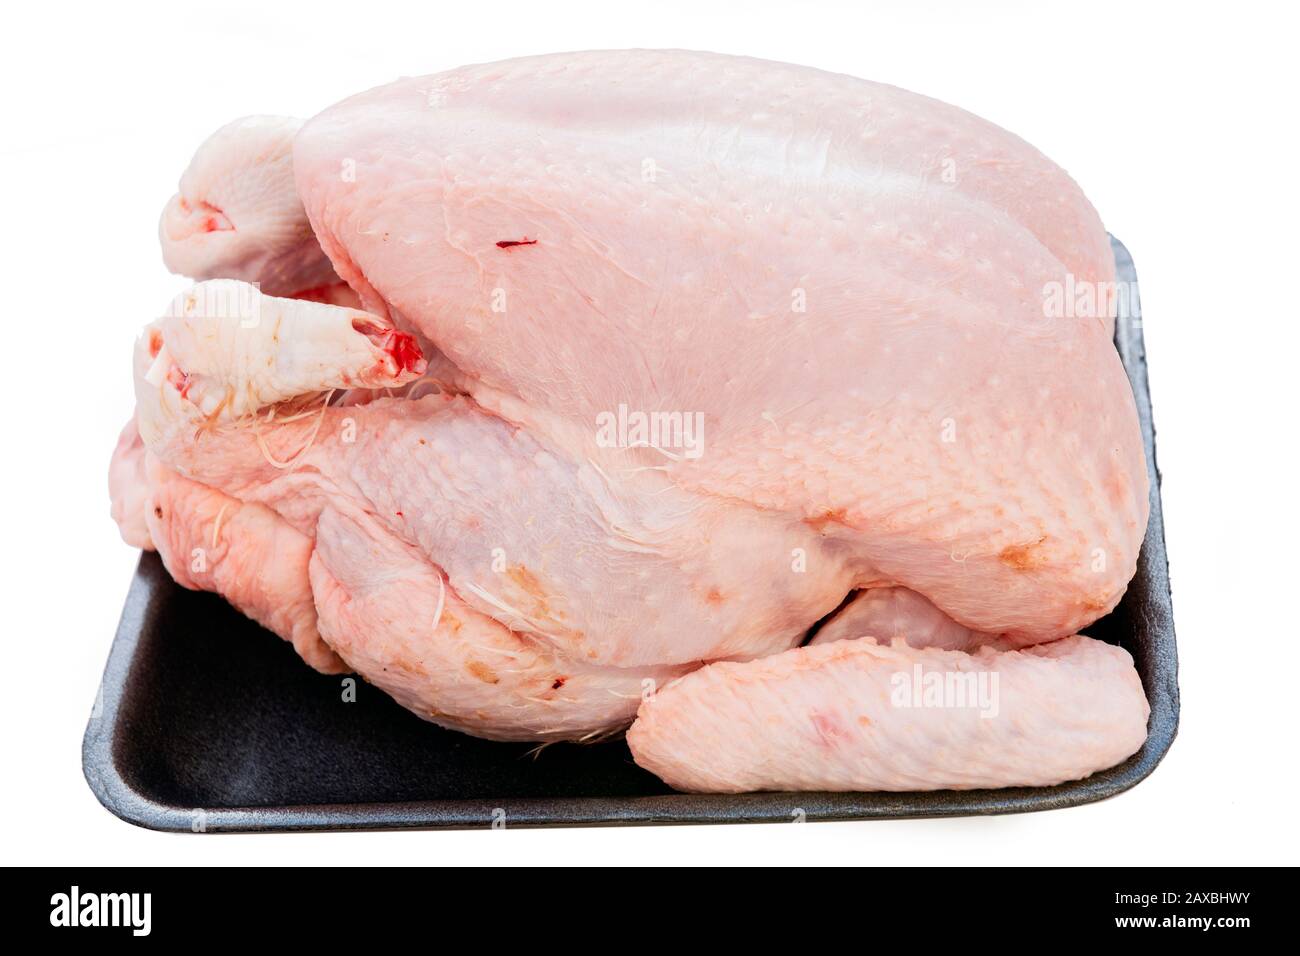 Uncooked whole chicken, UK. Oven ready chicken, cut out or isolated on a white background. Stock Photo